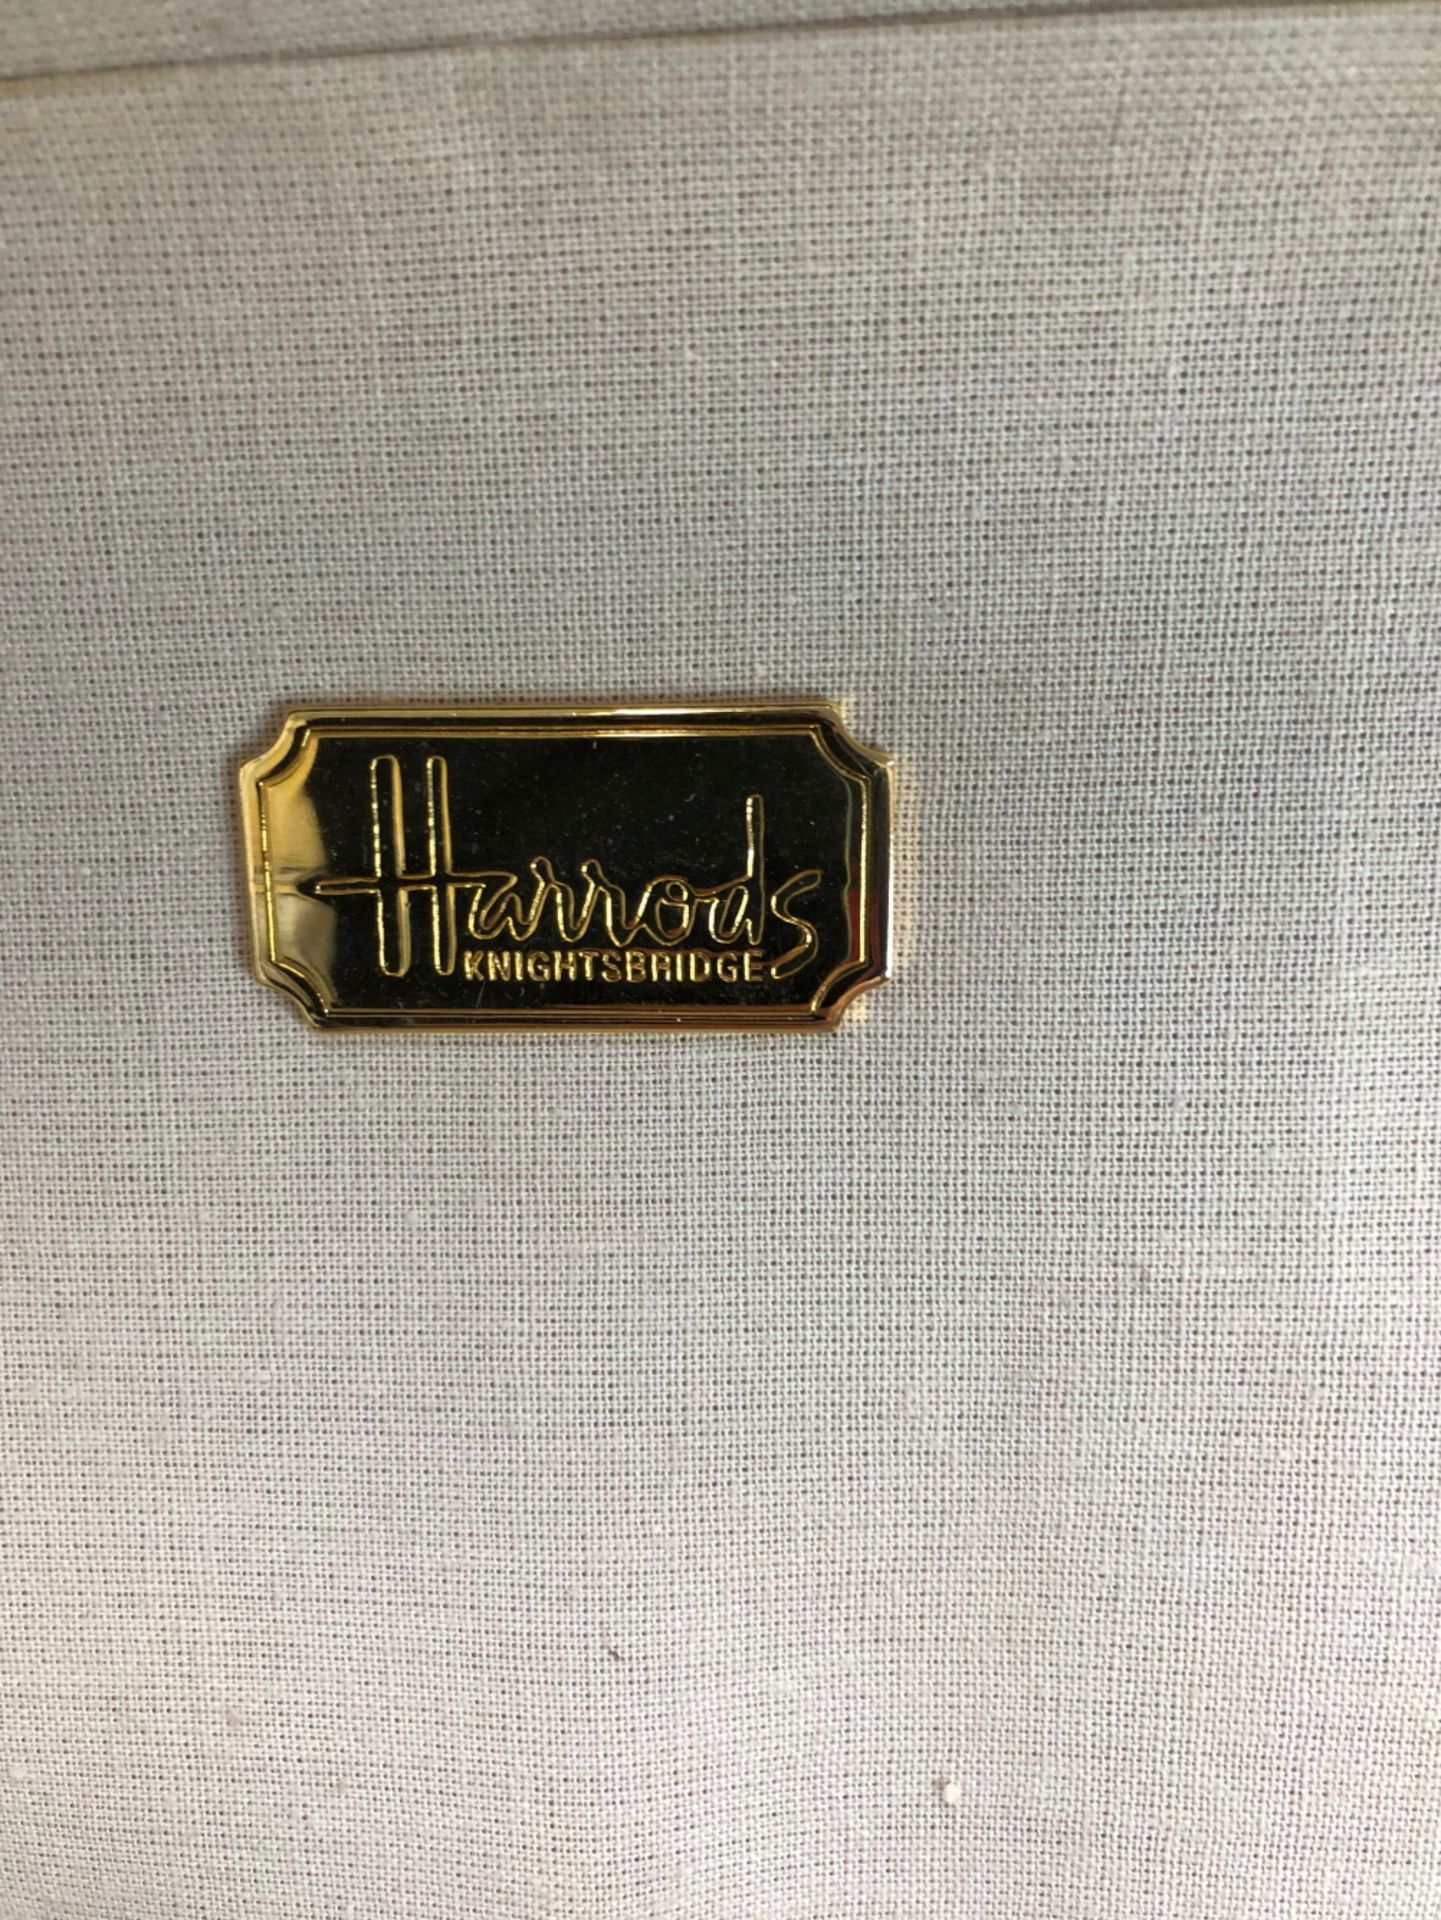 HARRODS VINTAGE MONOGRAM TAN AND BROWN SUITCASE AND TRAVEL BAG(2) - Image 25 of 33